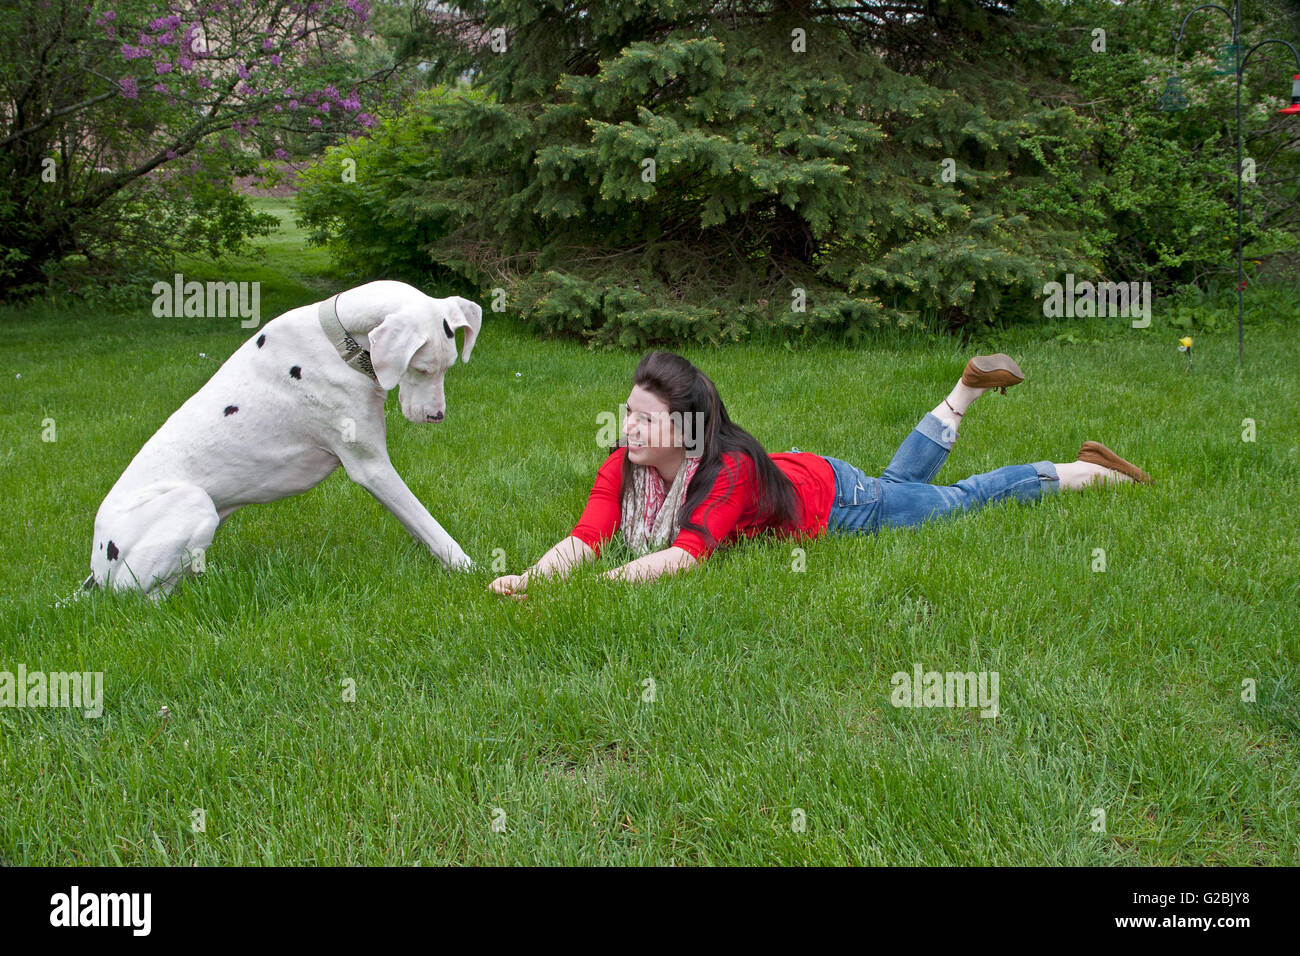 Woman in red plays with big dog Stock Photo